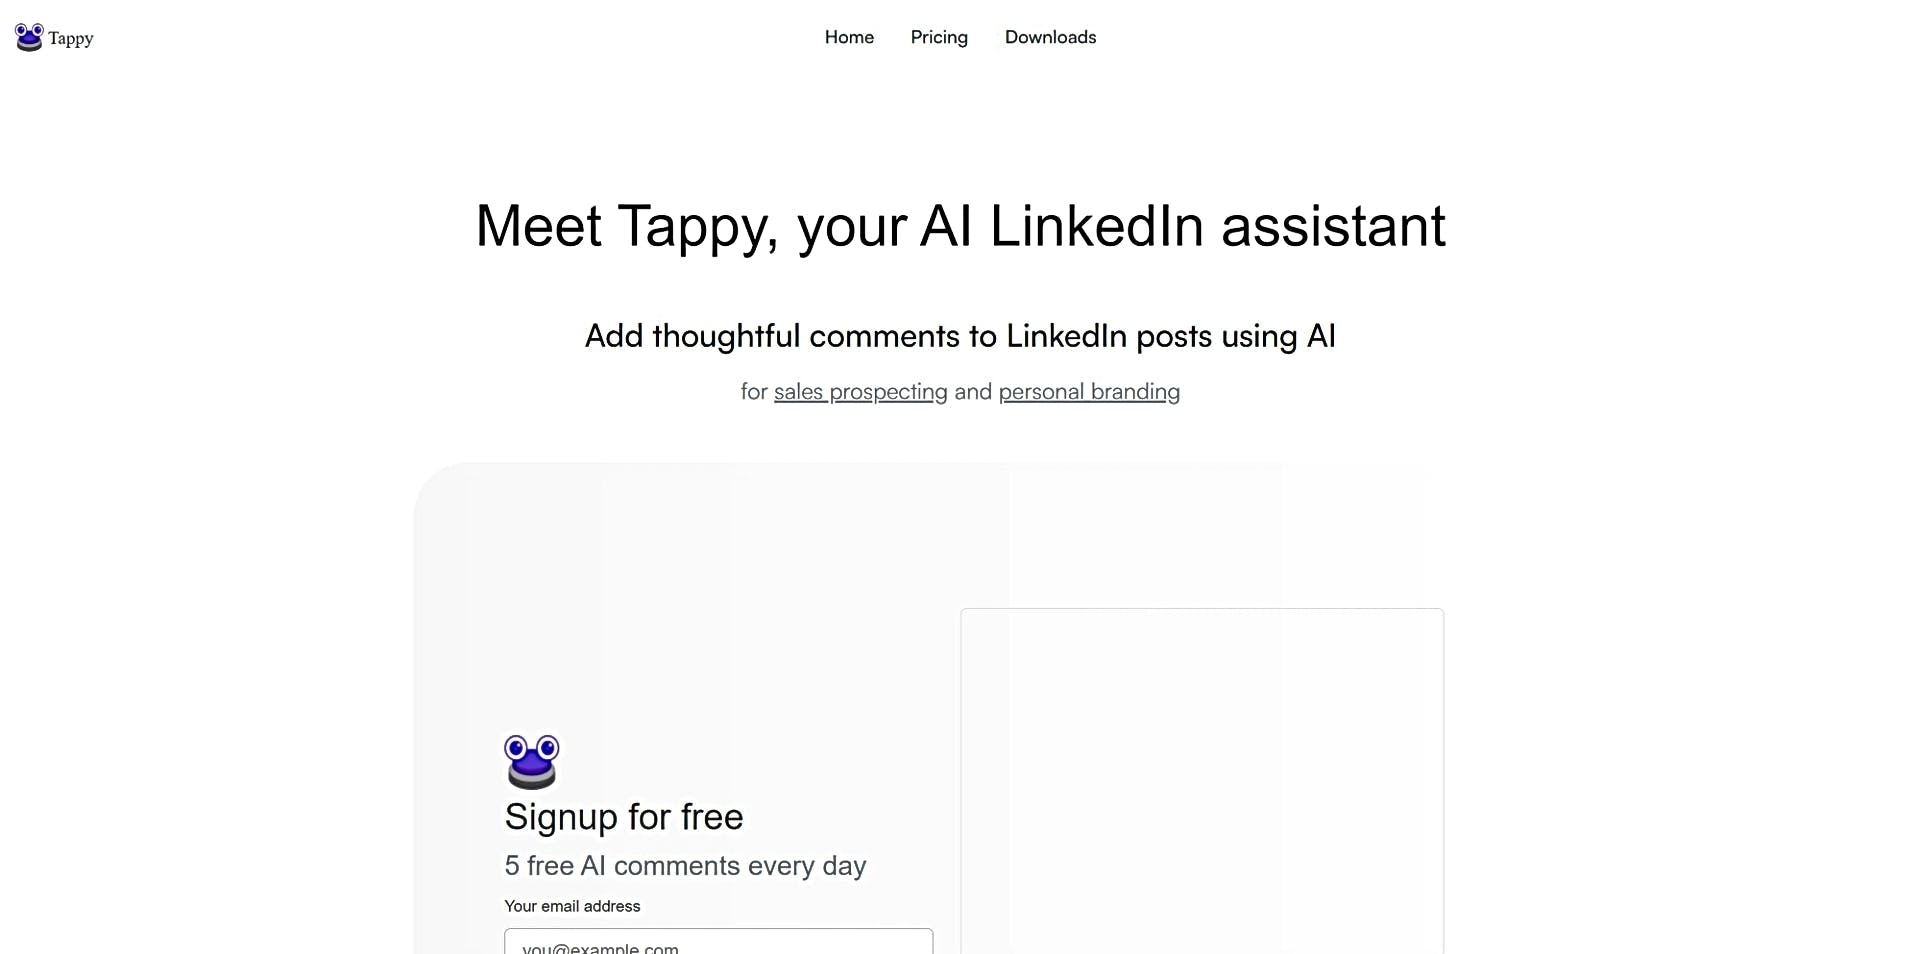 Tappy featured